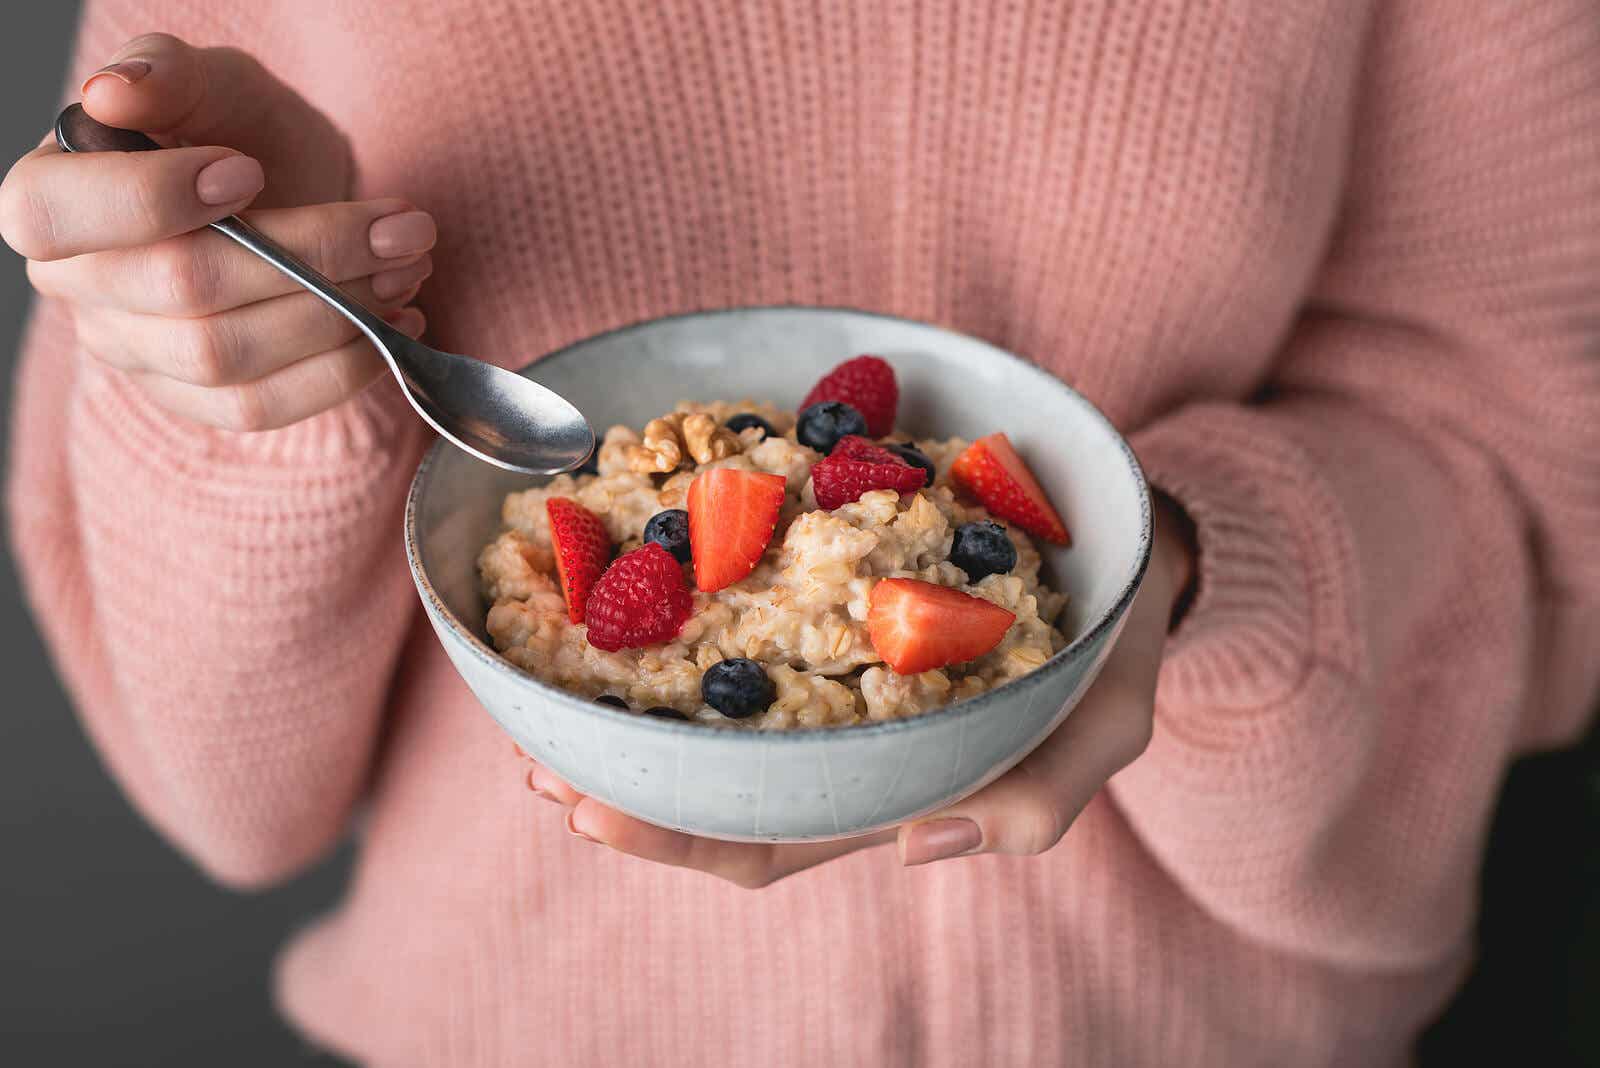 Woman eating a healthy breakfast to prevent gestational diabetes.